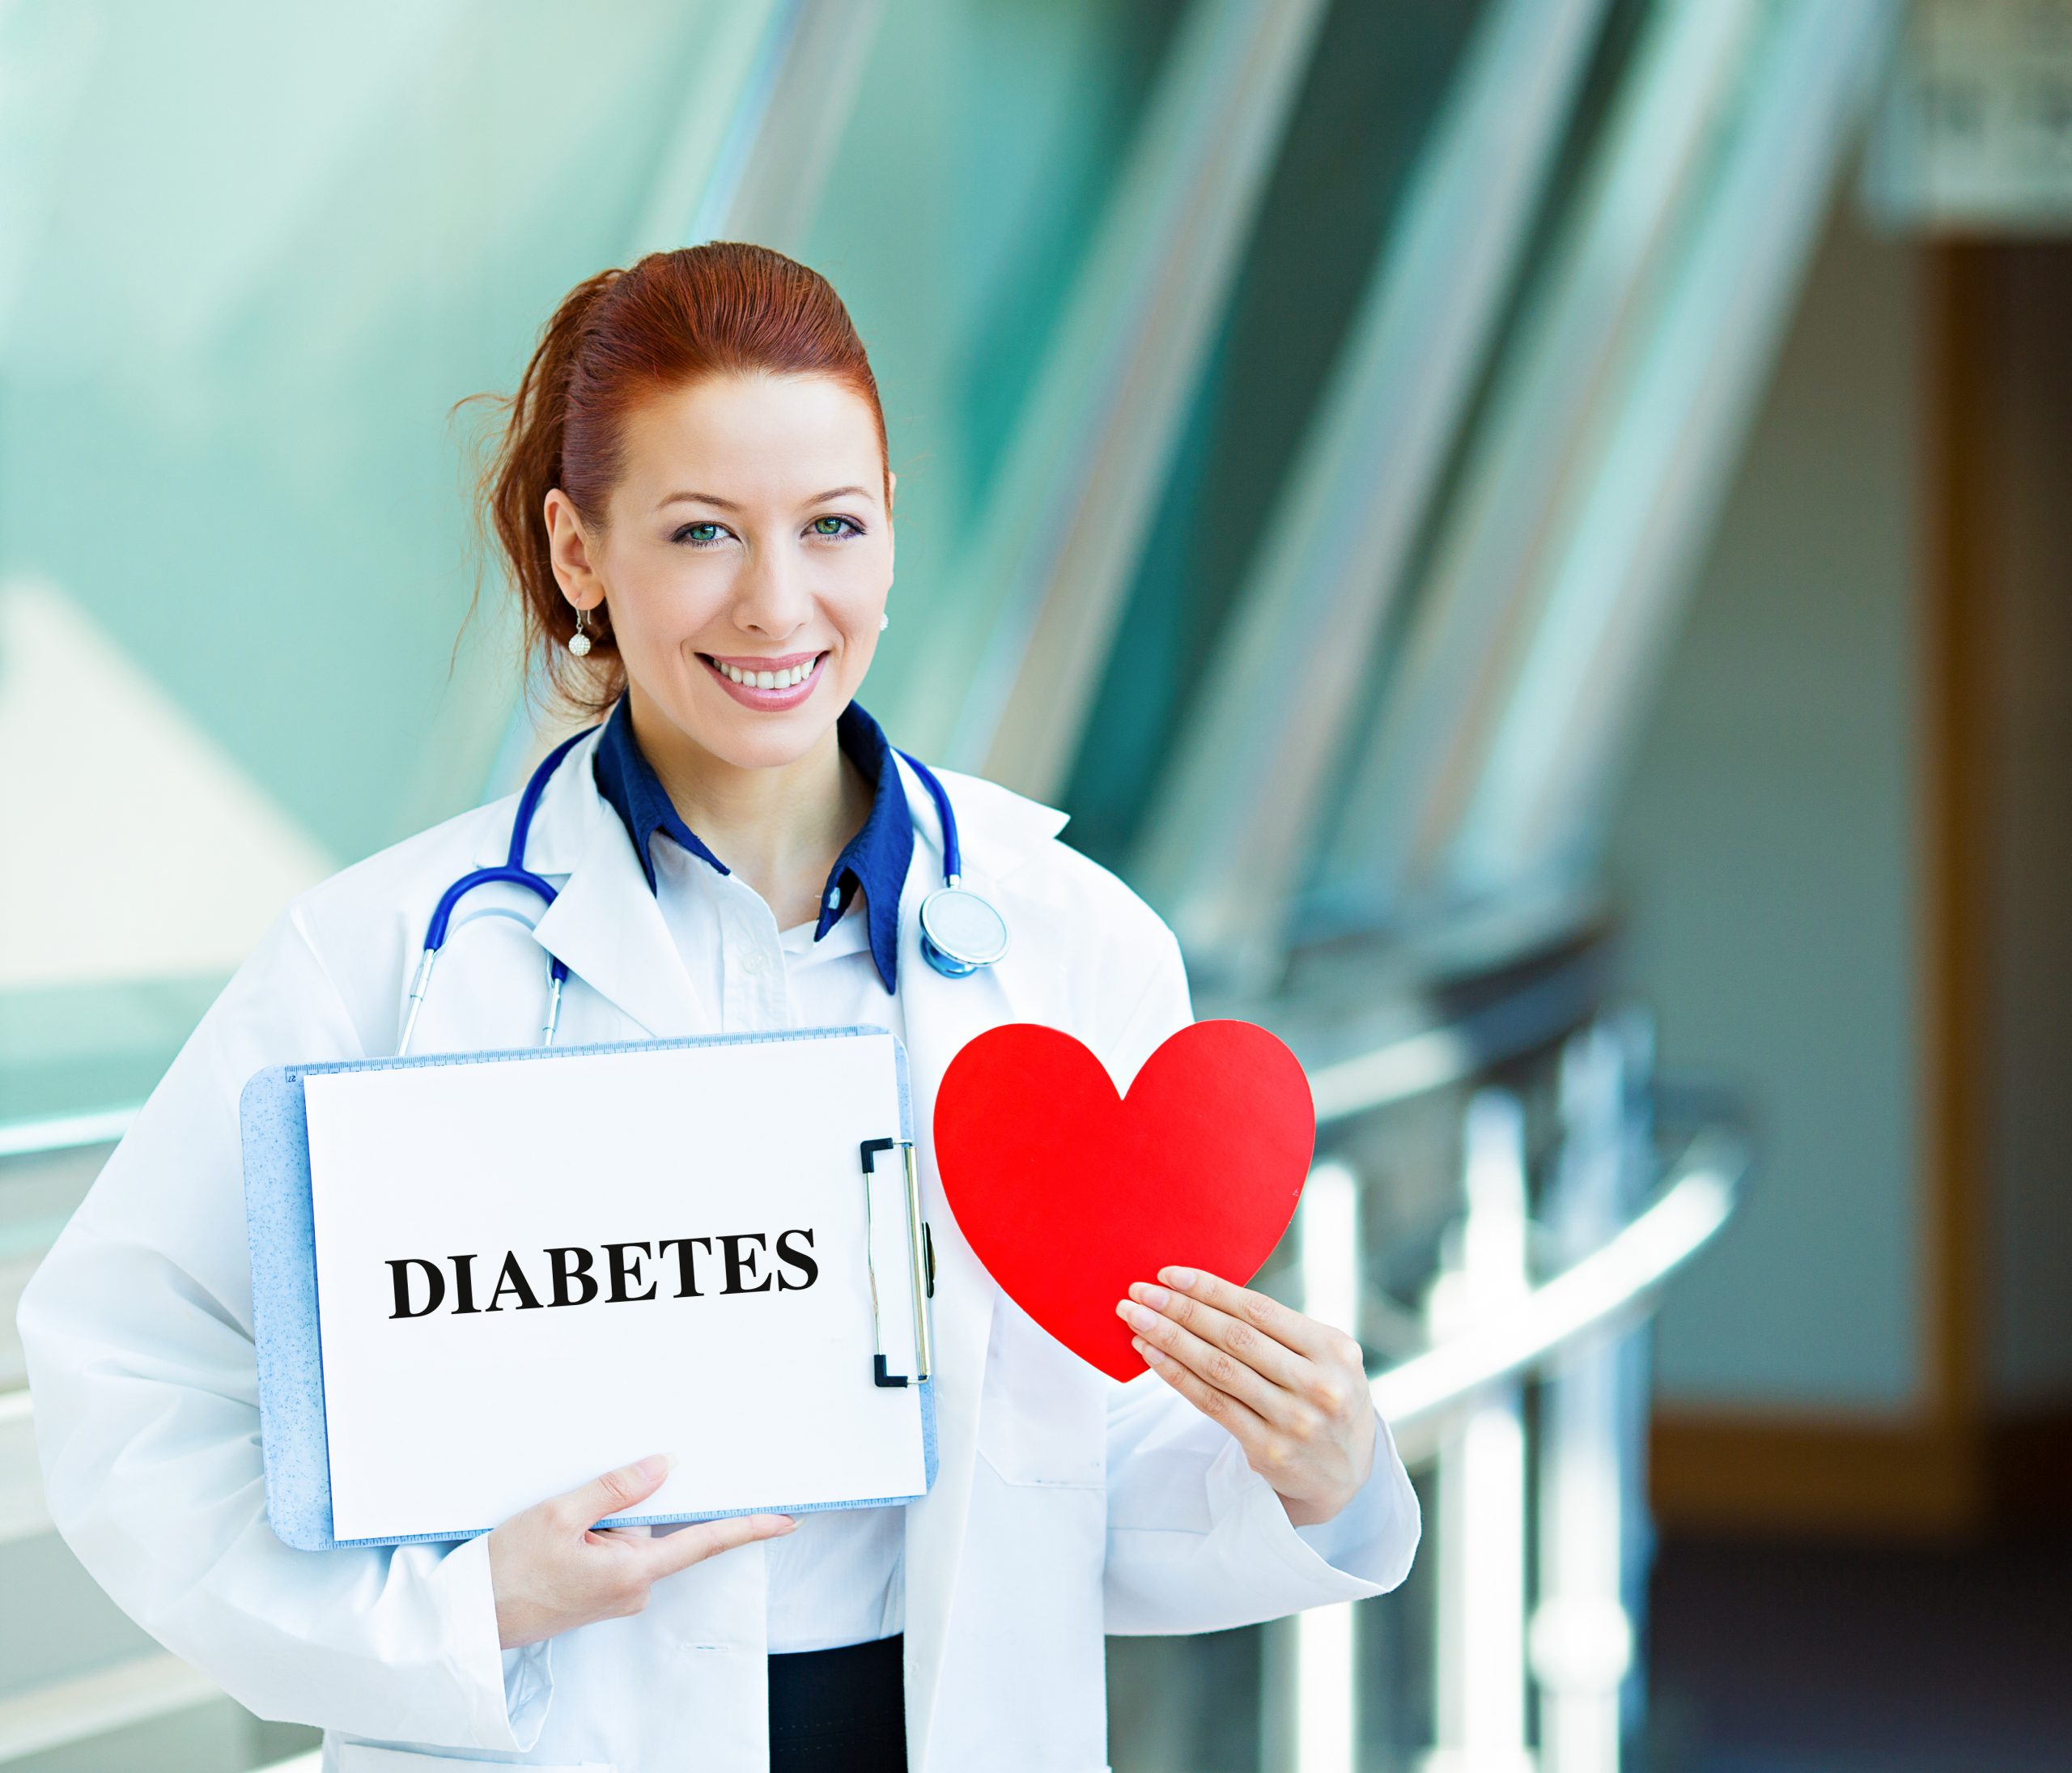 Diabetes and heart disease are related.